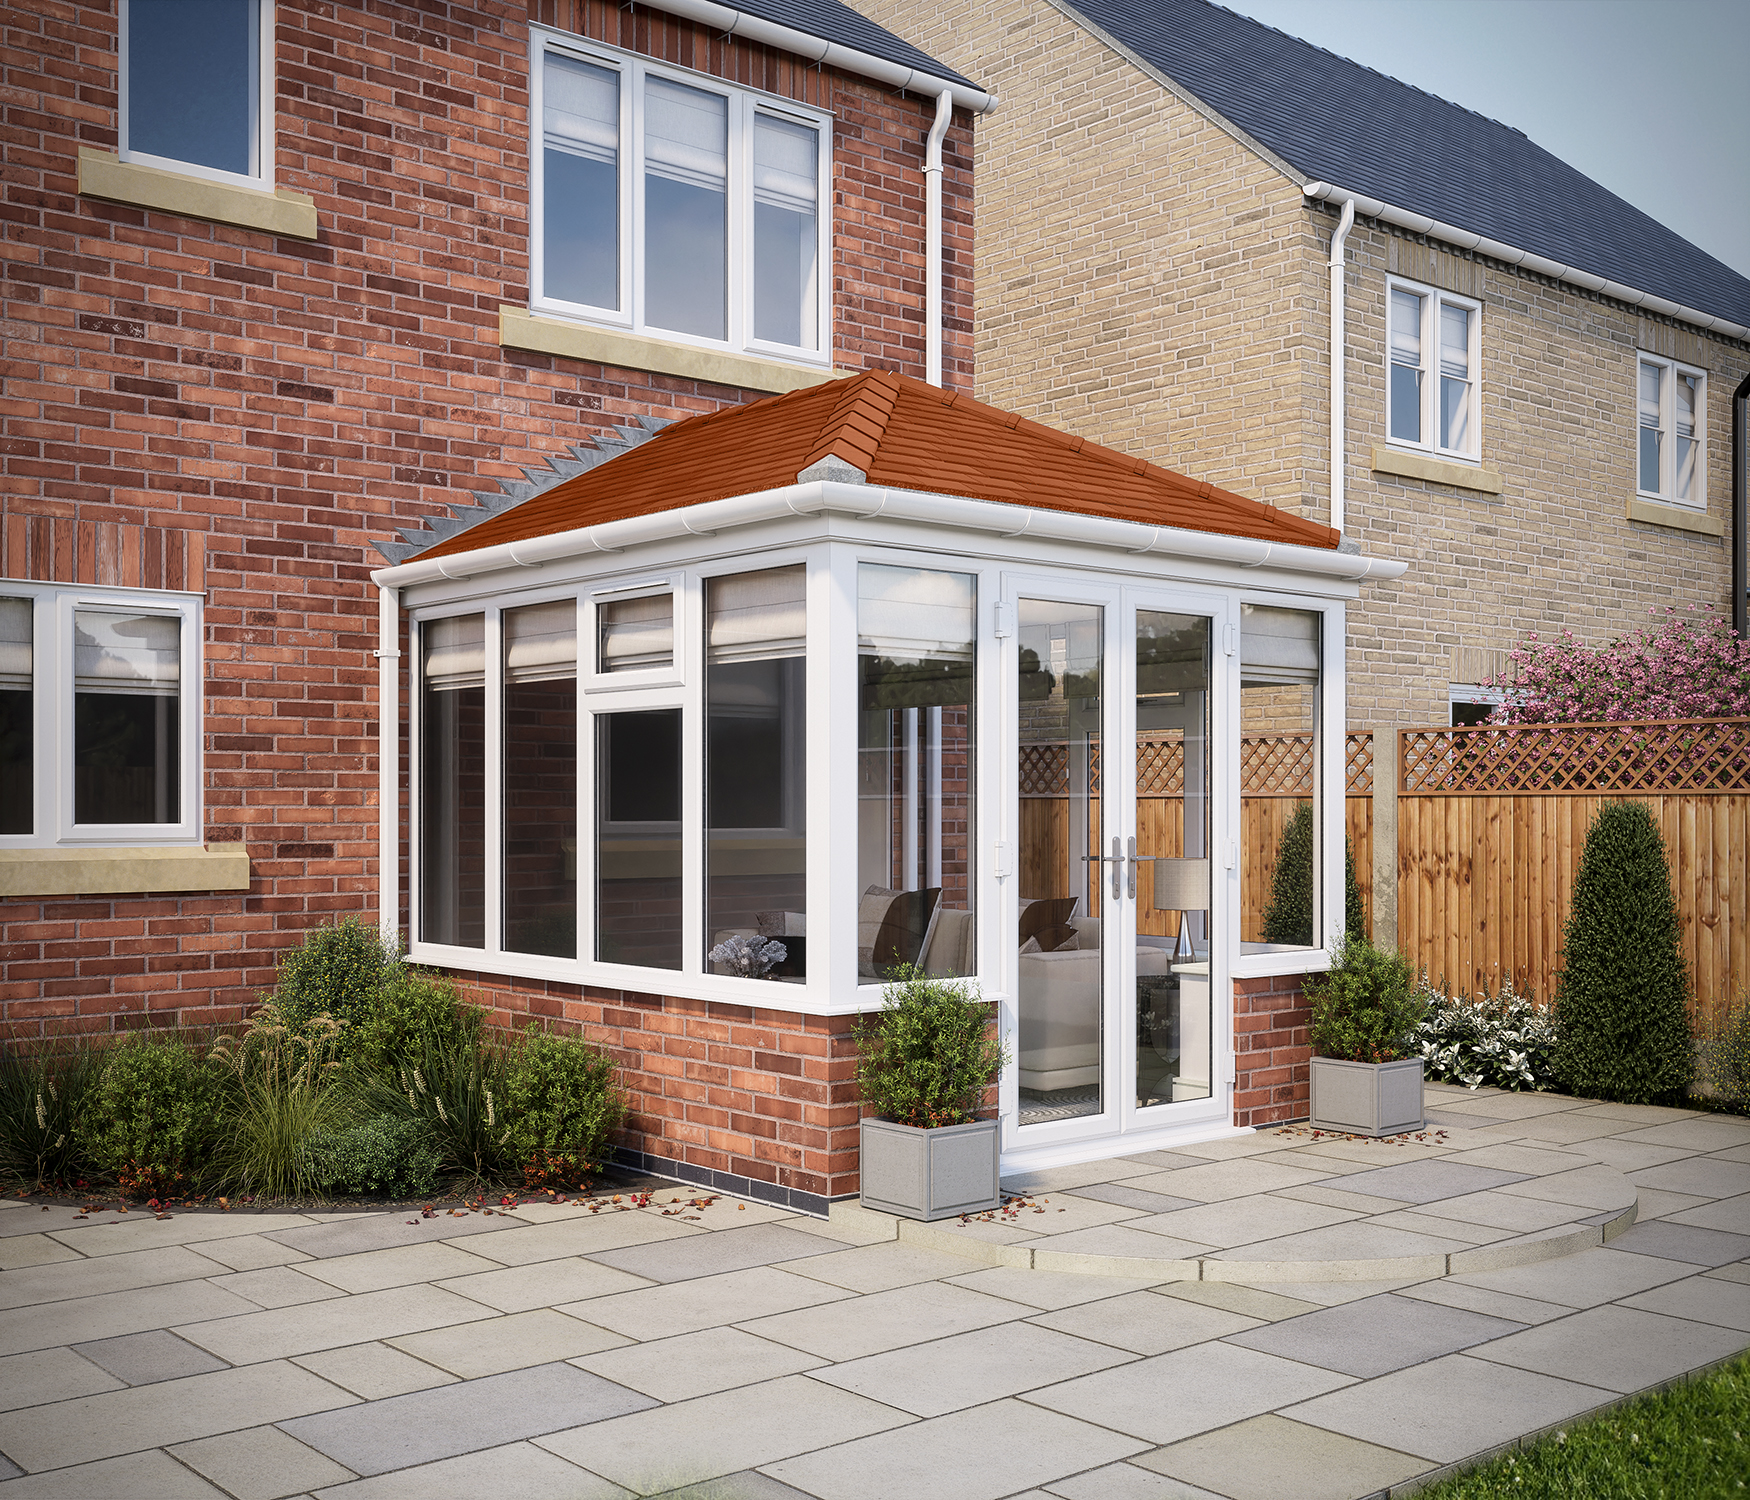 Image of SOLid Roof Edwardian Conservatory White Frames Dwarf Wall with Rustic Terracotta Tiles - 13 x 13ft